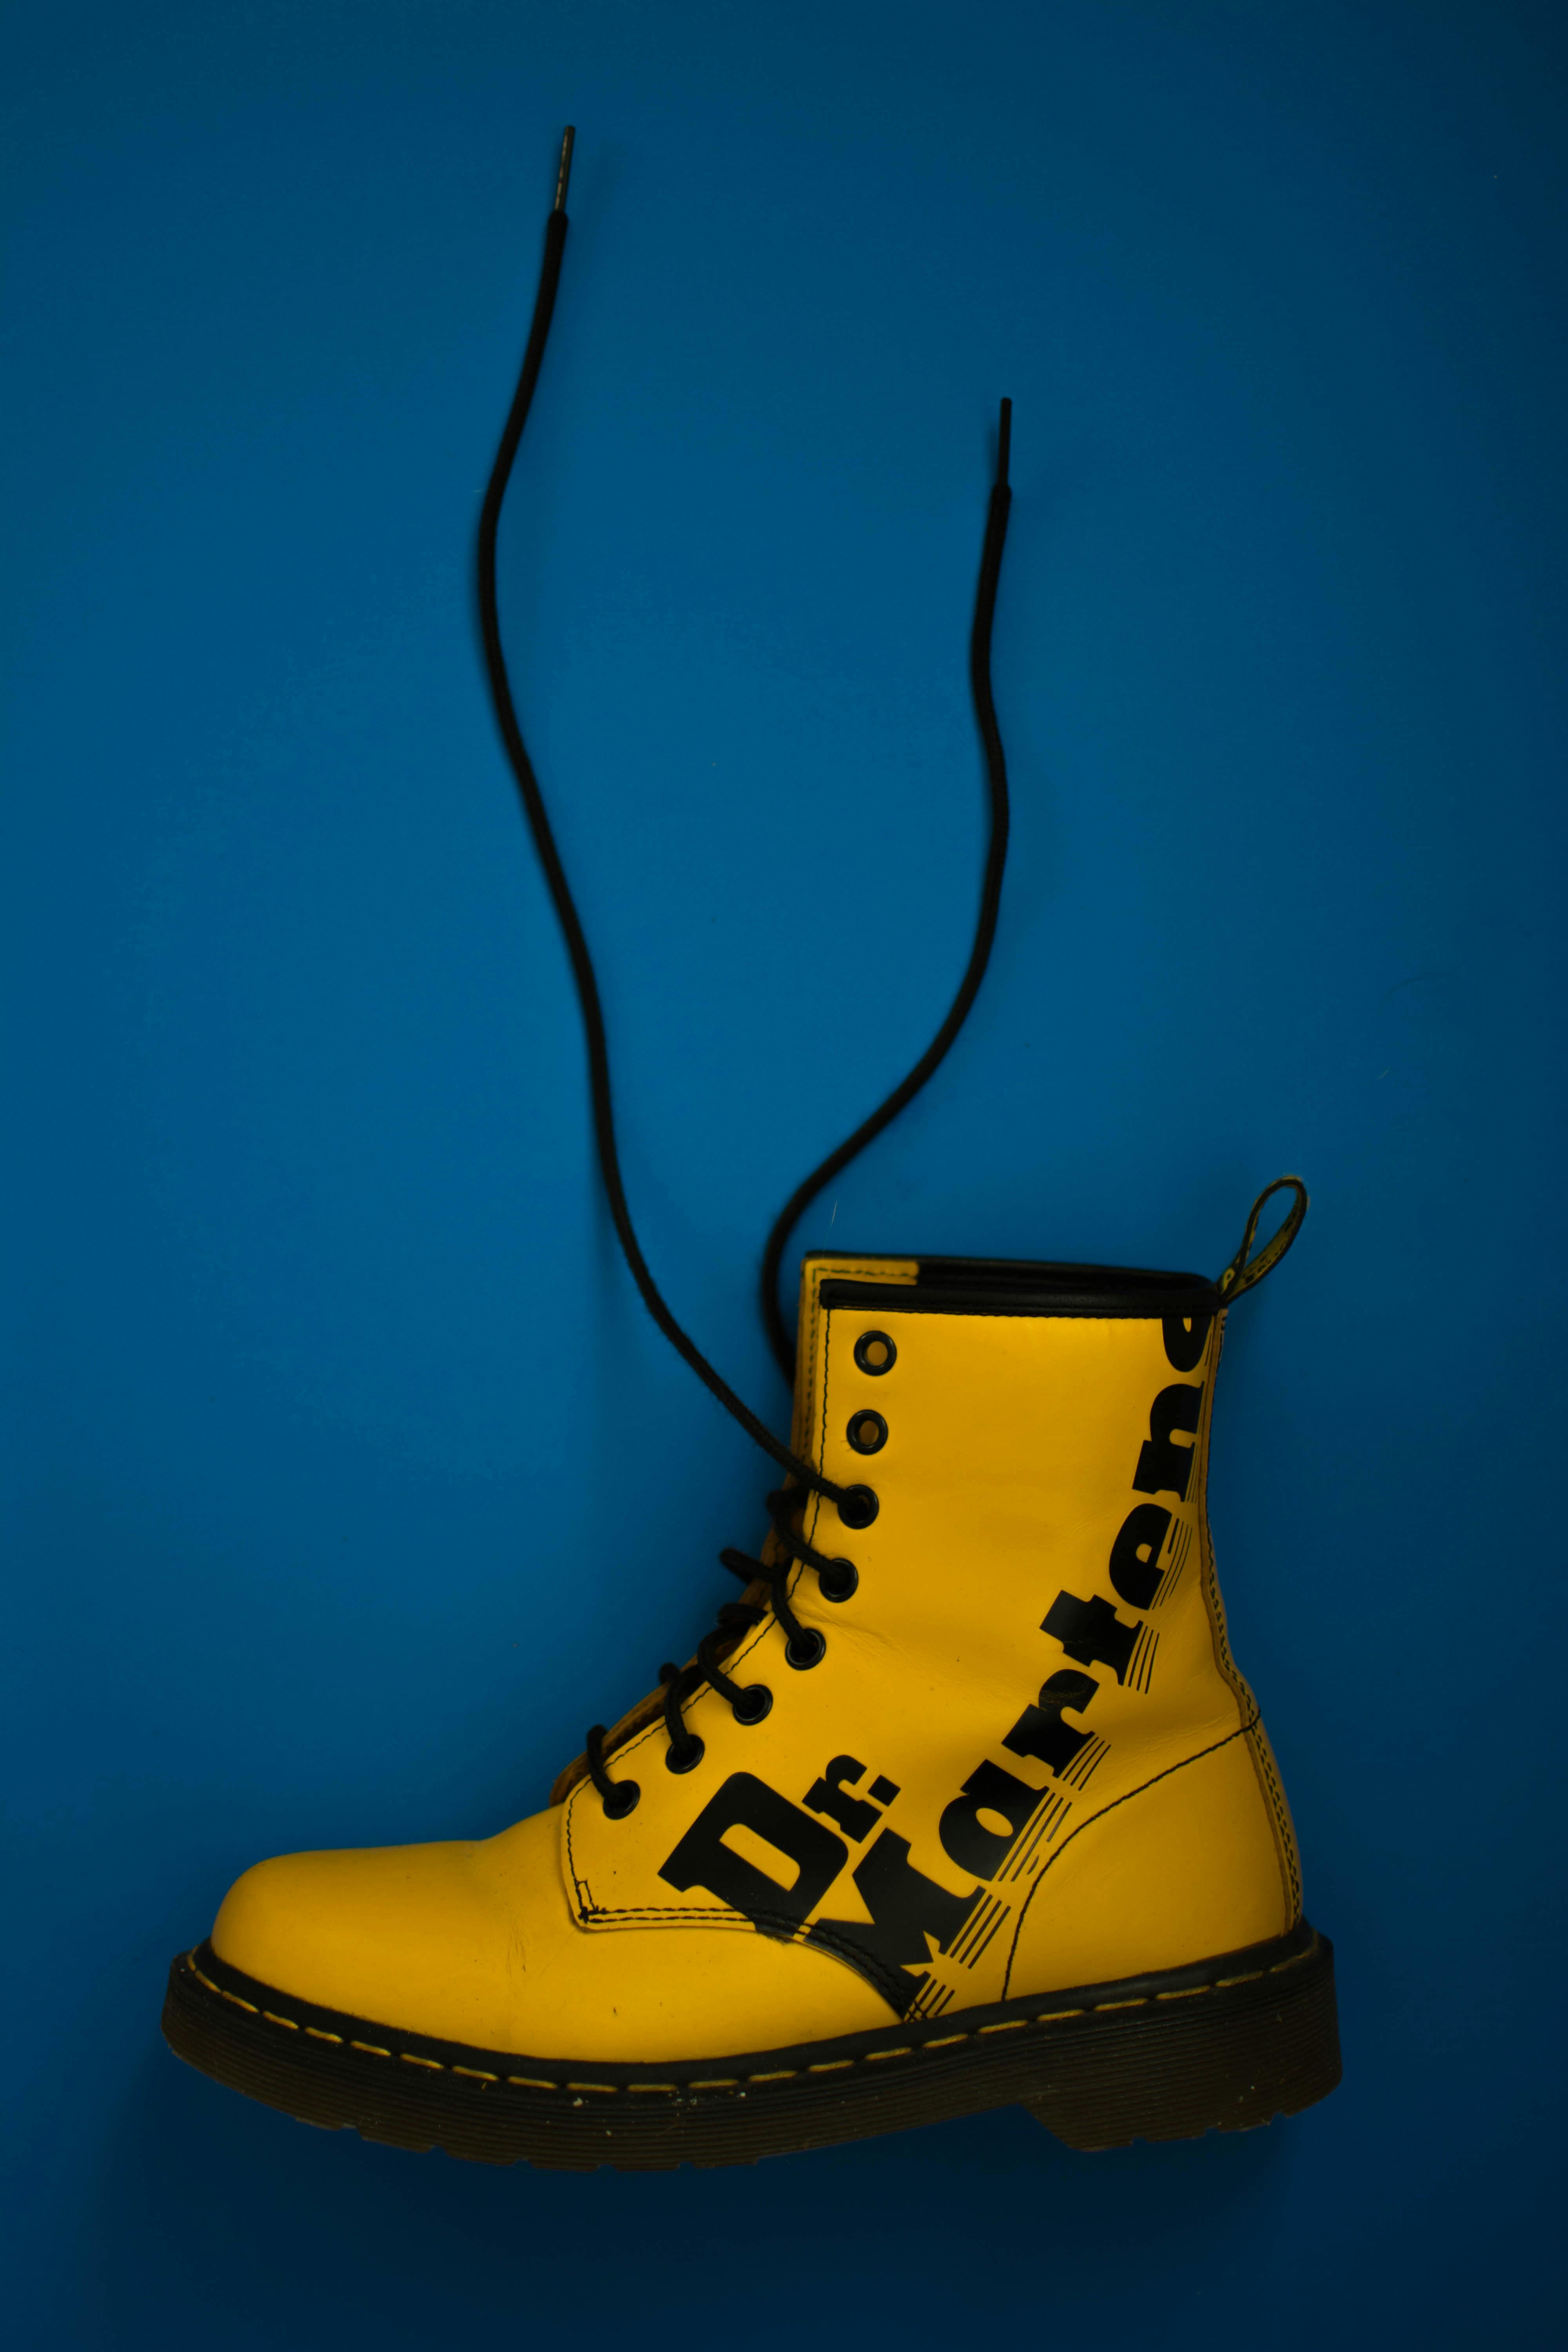 Yellow Dr. Martens lace-up boot. | Photo: Pexels